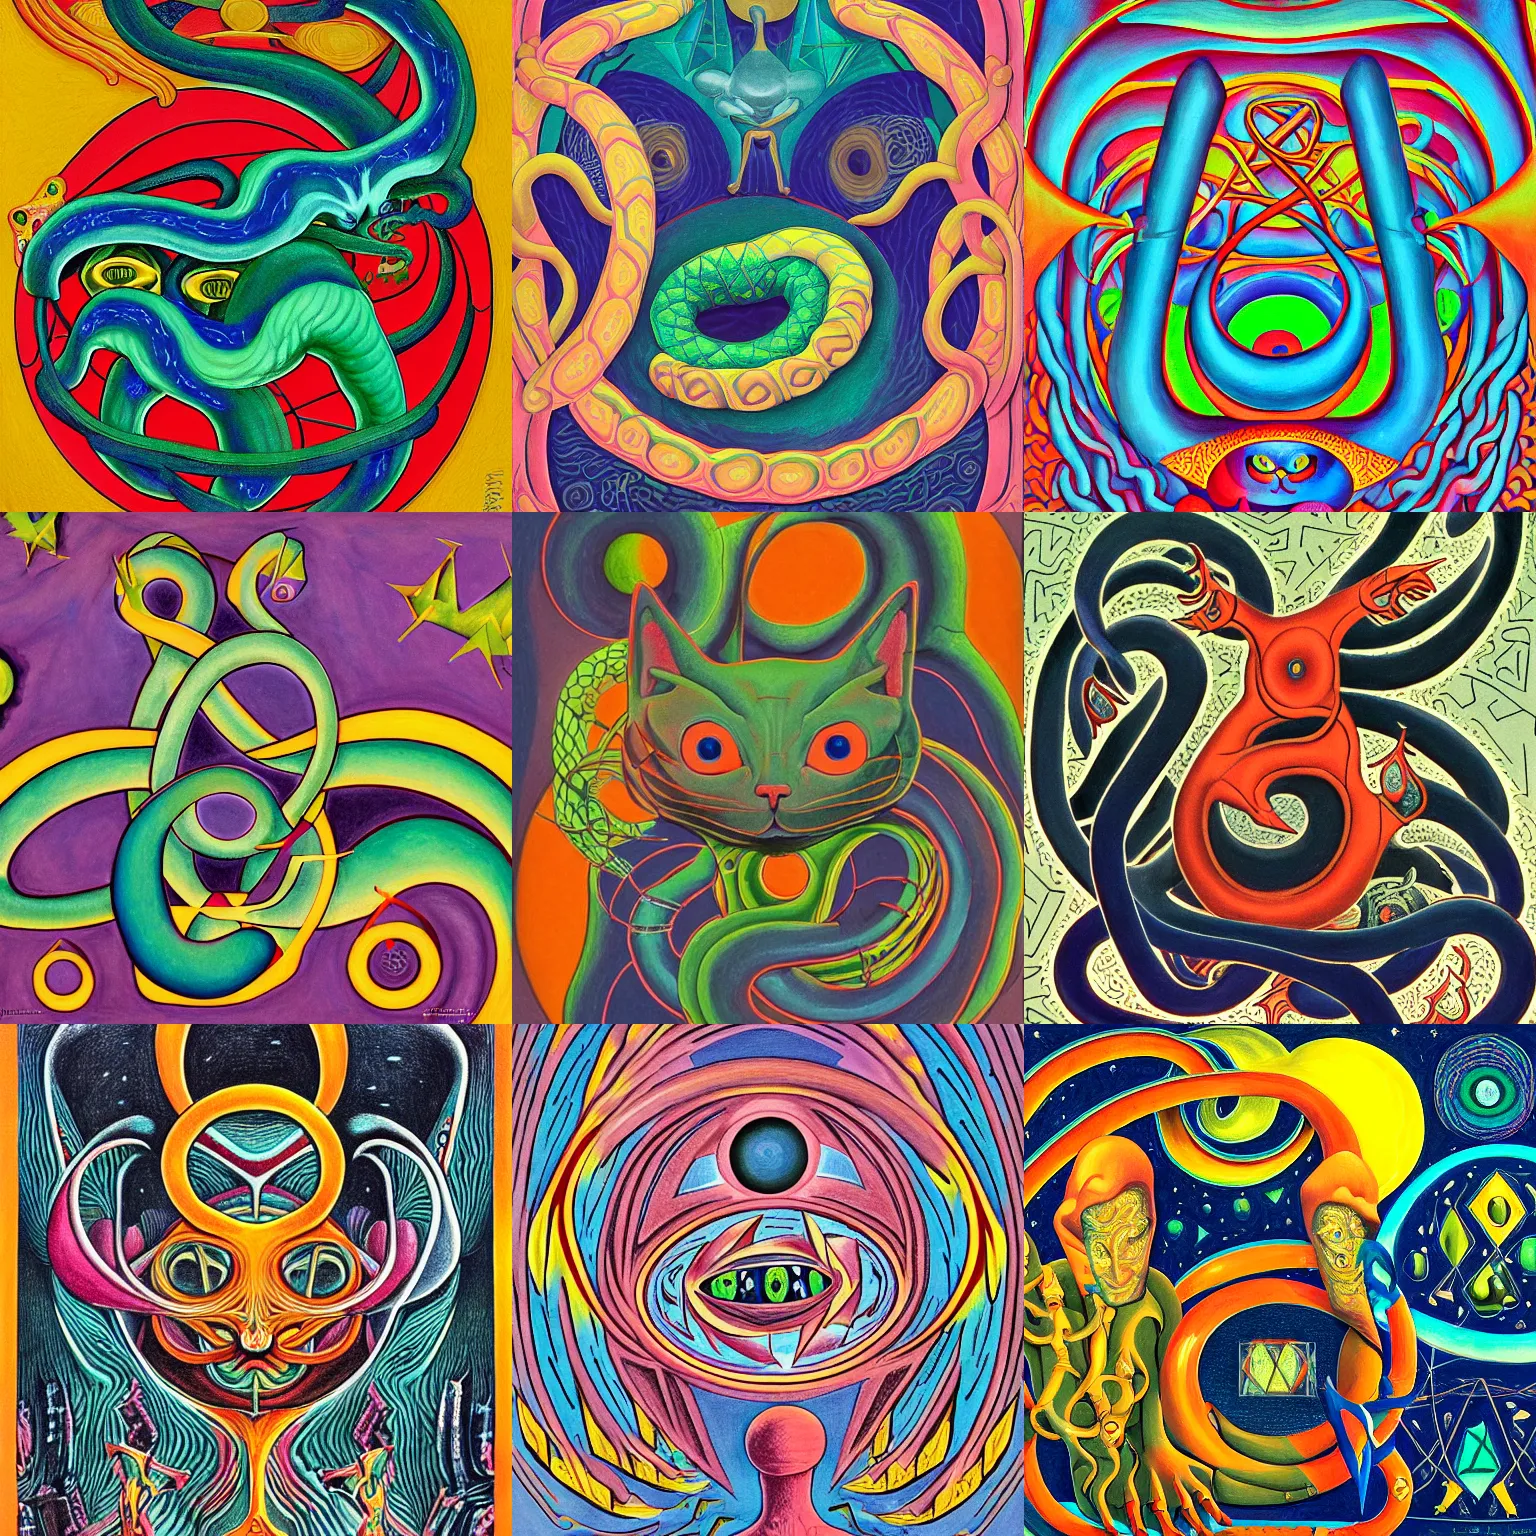 Prompt: a detailed gouache painting of a magick cat occult effigy that is a crescent shaped atomic latent spaces in between autobiological cybernetic resurgence of snake phonkadelic inspirations in the style of escher, alex grey, kubrick inspired by surrealism, symbolism, and dark fantasy